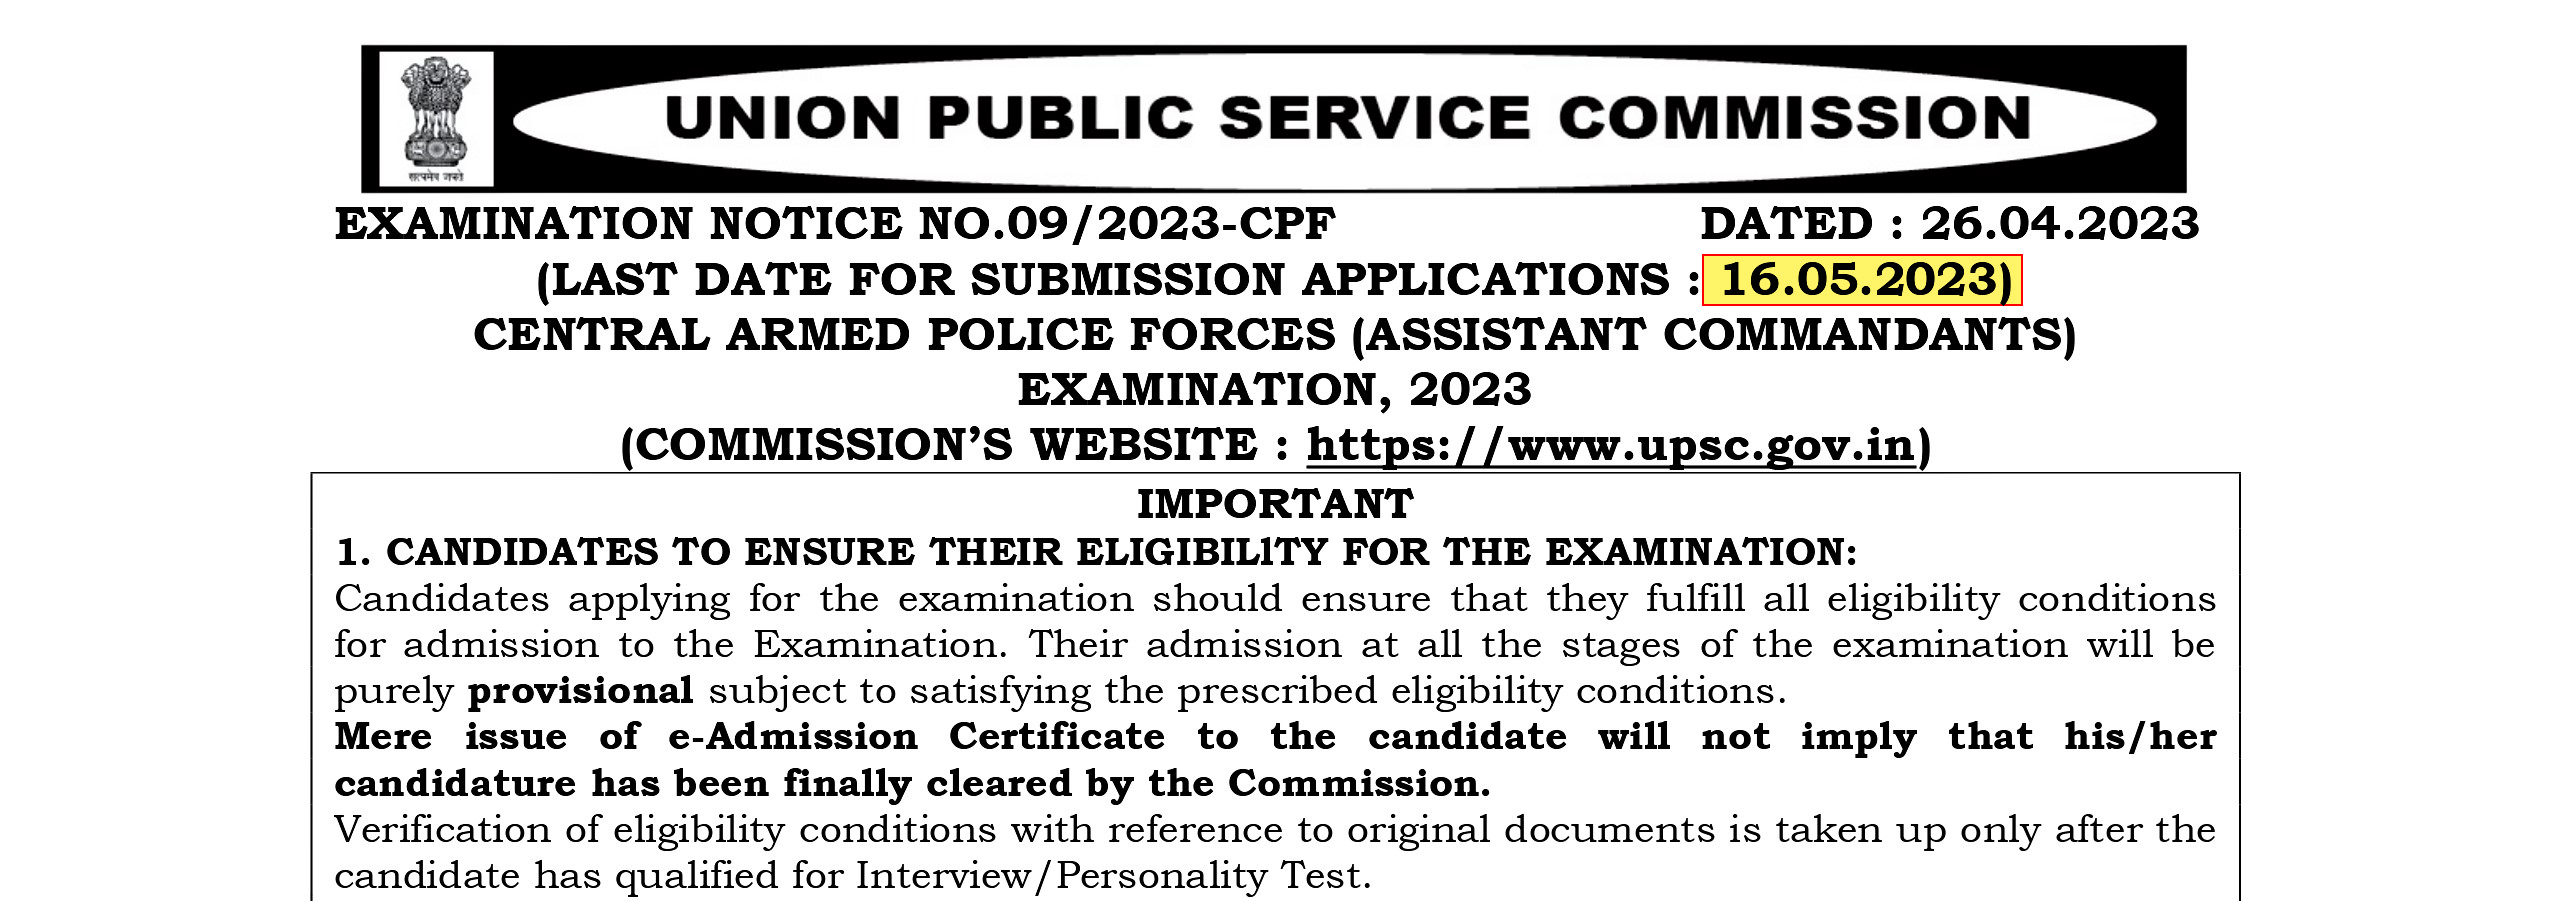 UPSC Central Armed Police Forces Recruitment 2023